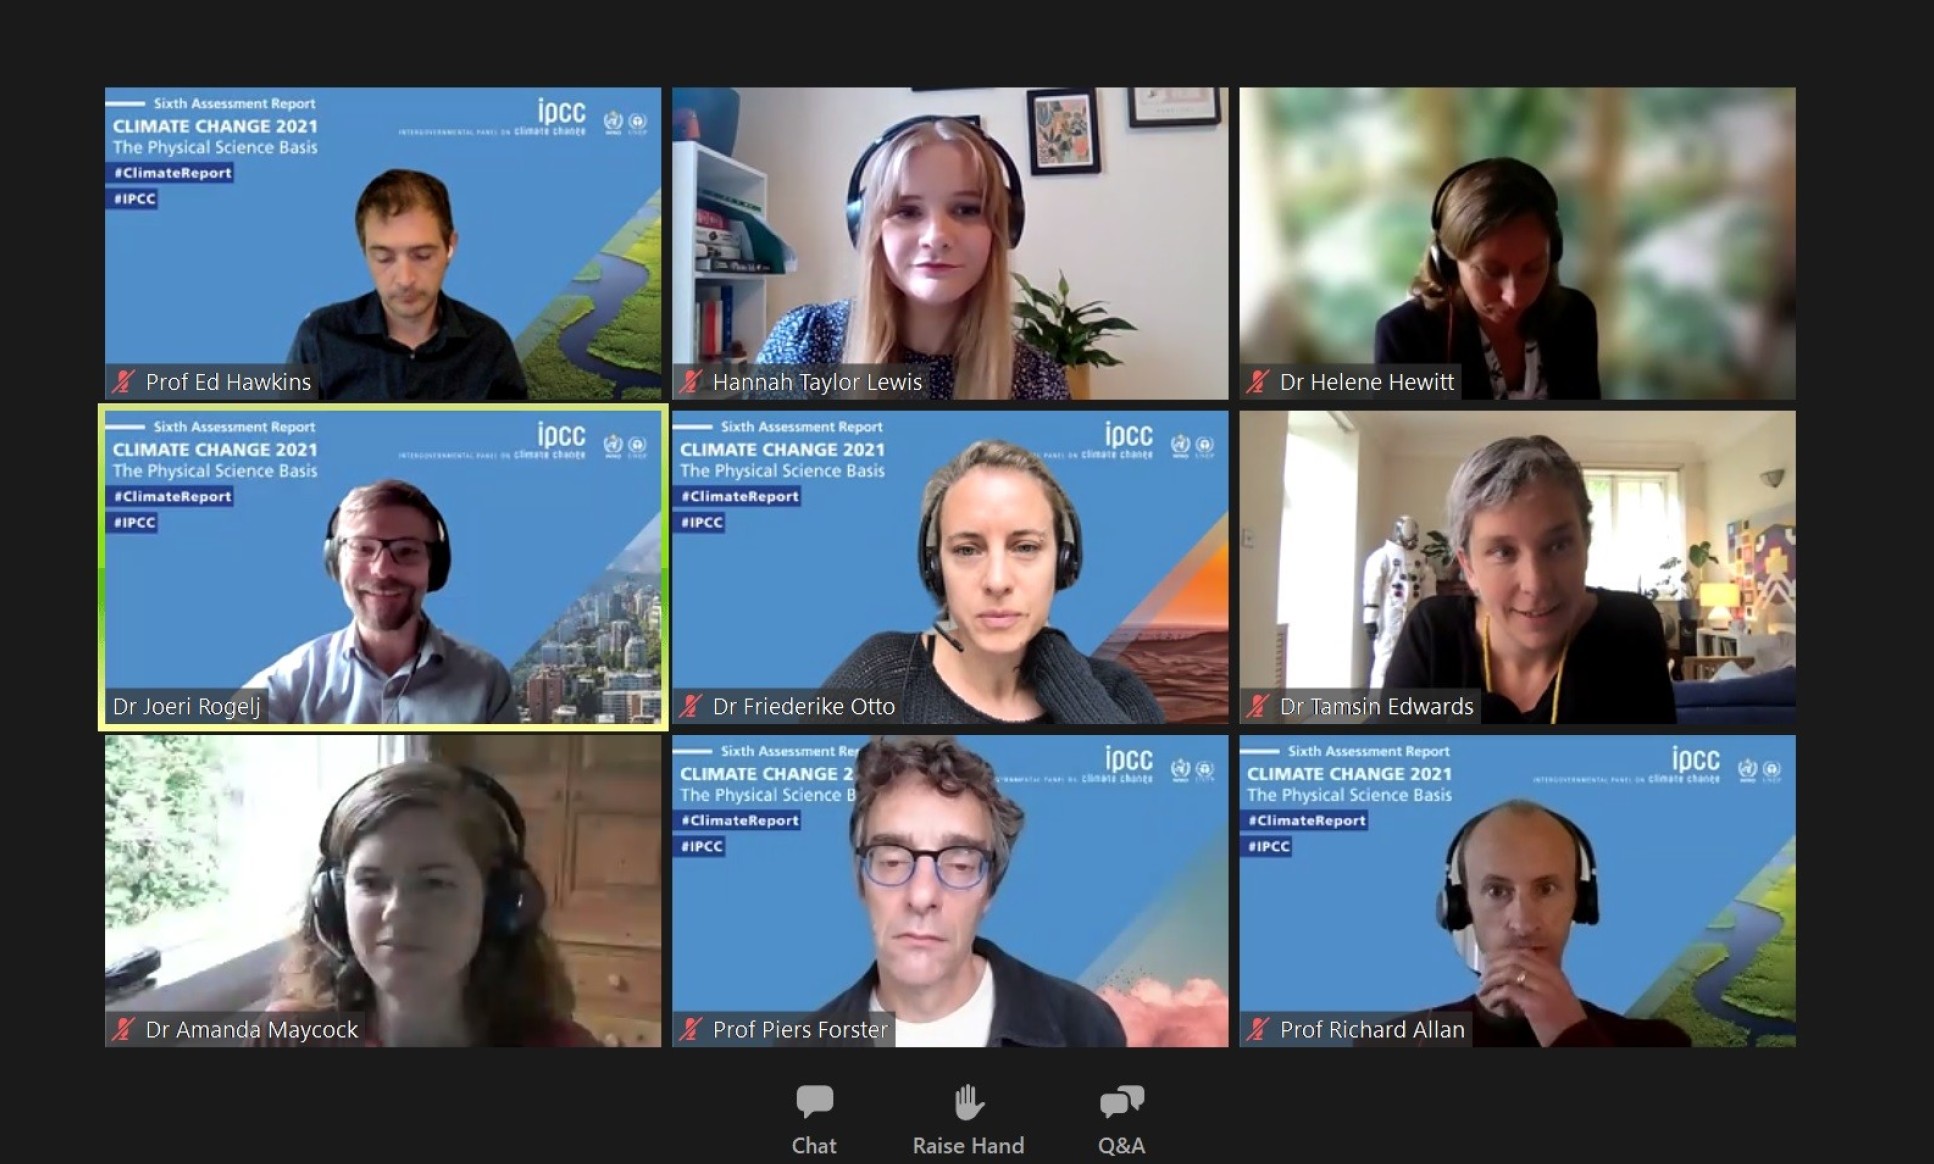 Nine faces on a Zoom window, with branded backgrounds by IPCC. Prof Ed Hawkins, Hannah Taylor-Lewis, Dr Helene Hewitt, Dr Joeri Rogelj, Dr Friederike Otto, Dr Tamsin Edwards, Dr Amanda Maycock, Prof Piers Forster, Prof Richard Allan